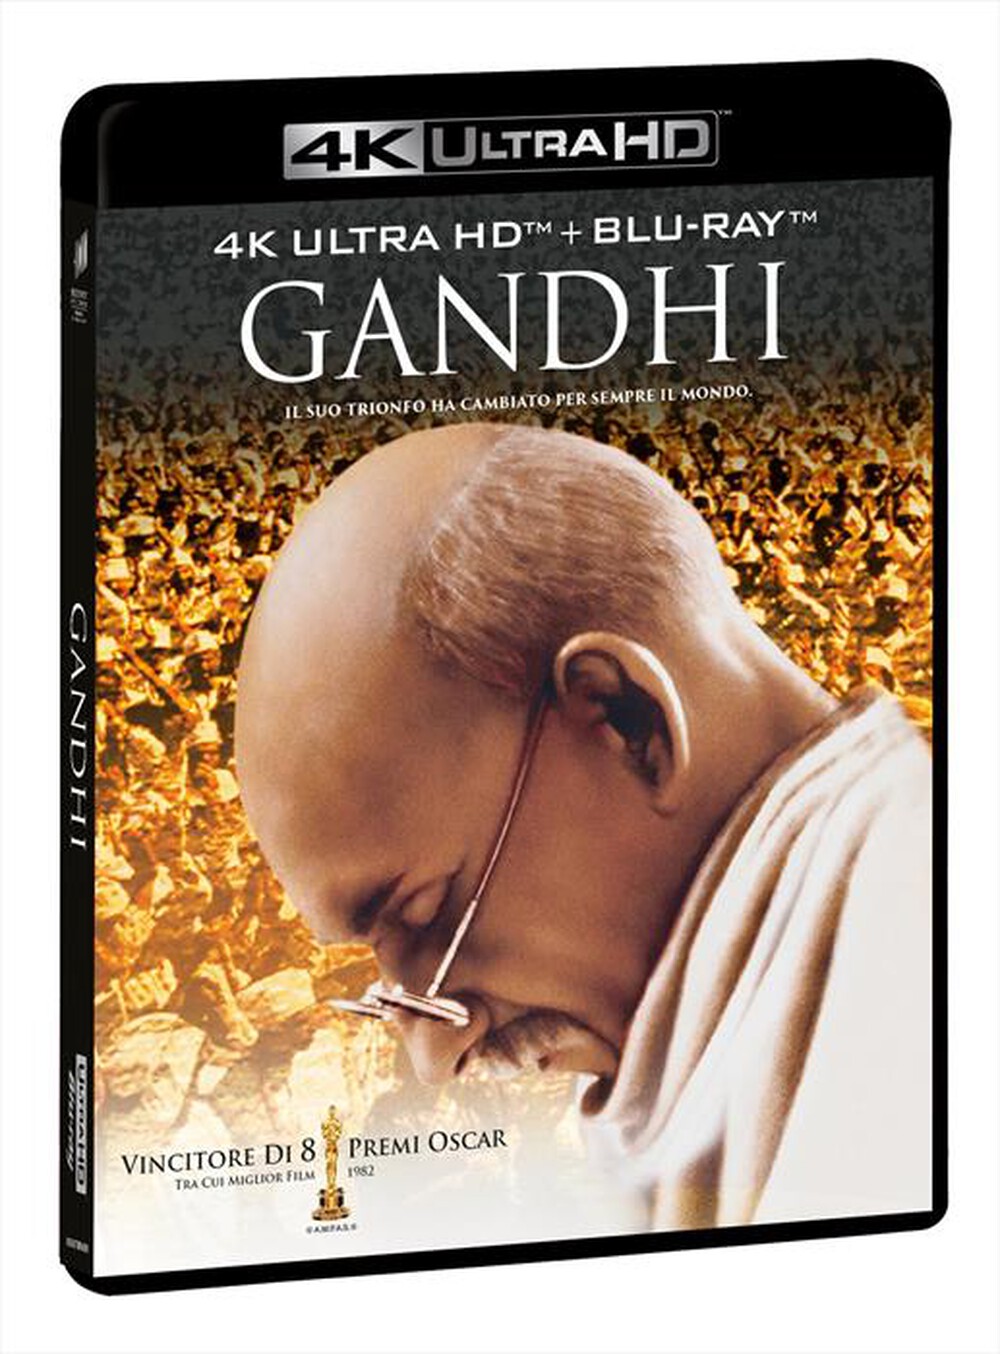 "EAGLE PICTURES - Gandhi (4K Ultra Hd+Blu-Ray)"